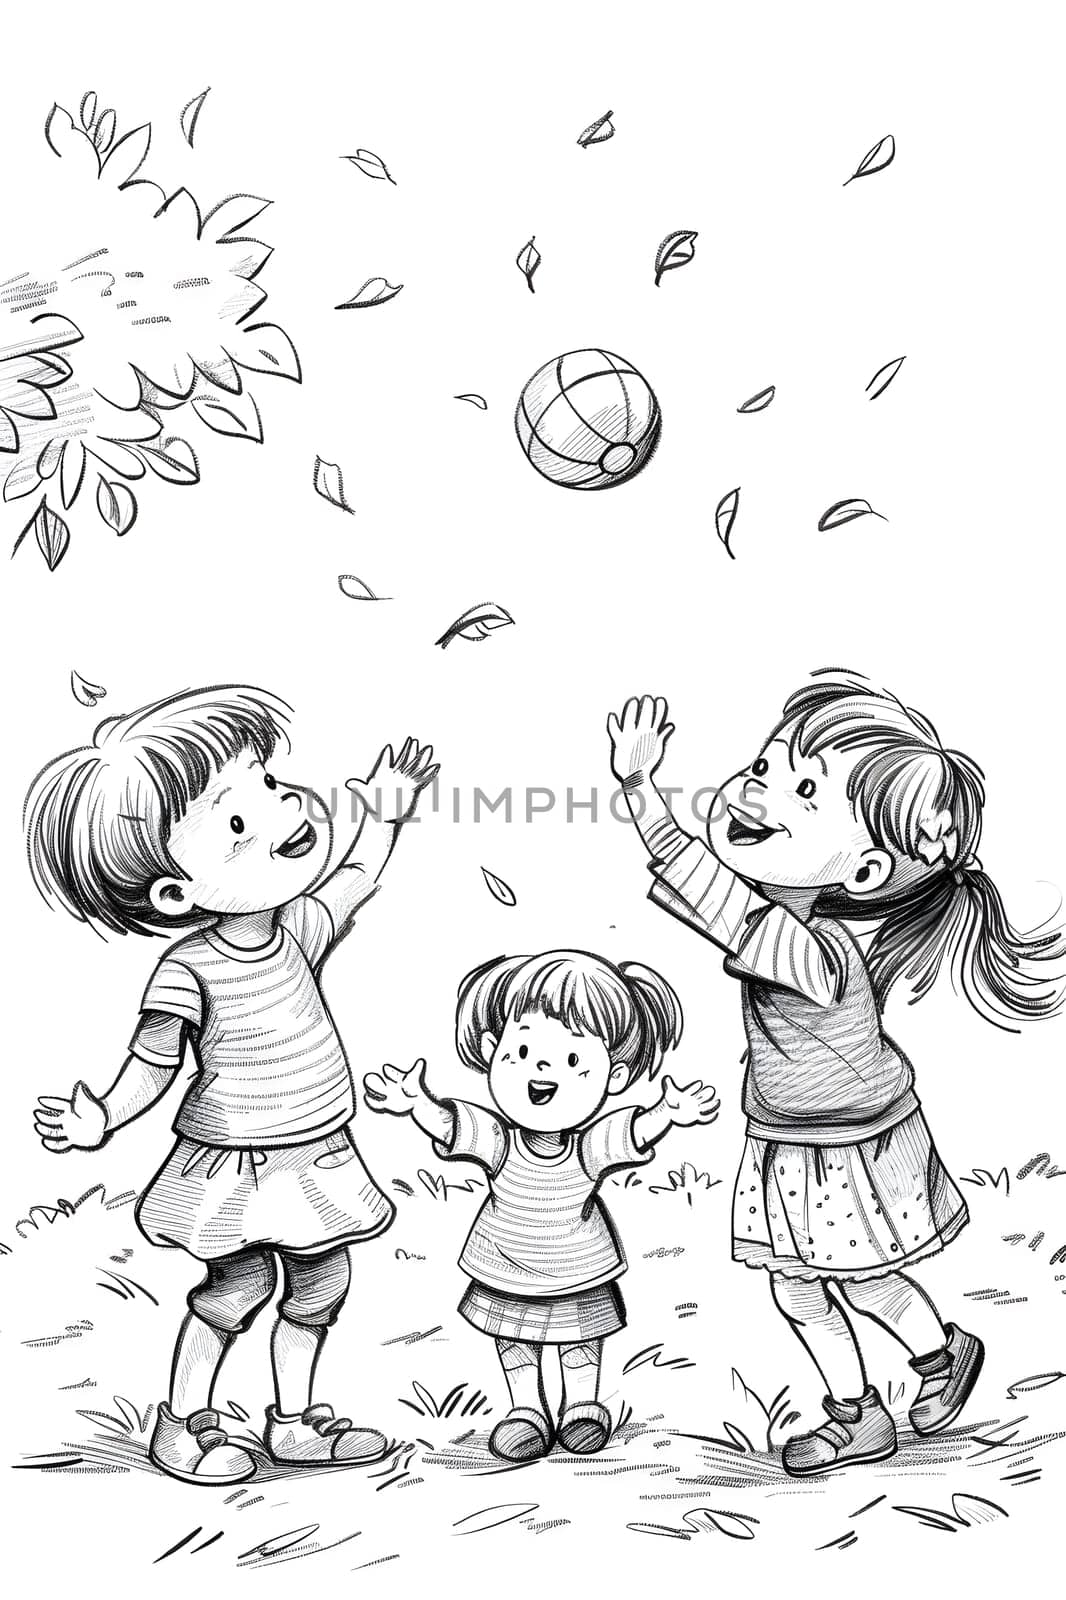 A cartoon black and white drawing of three little girls with different hairstyles playing with a ball, each wearing different footwear and showing joyful facial expressions